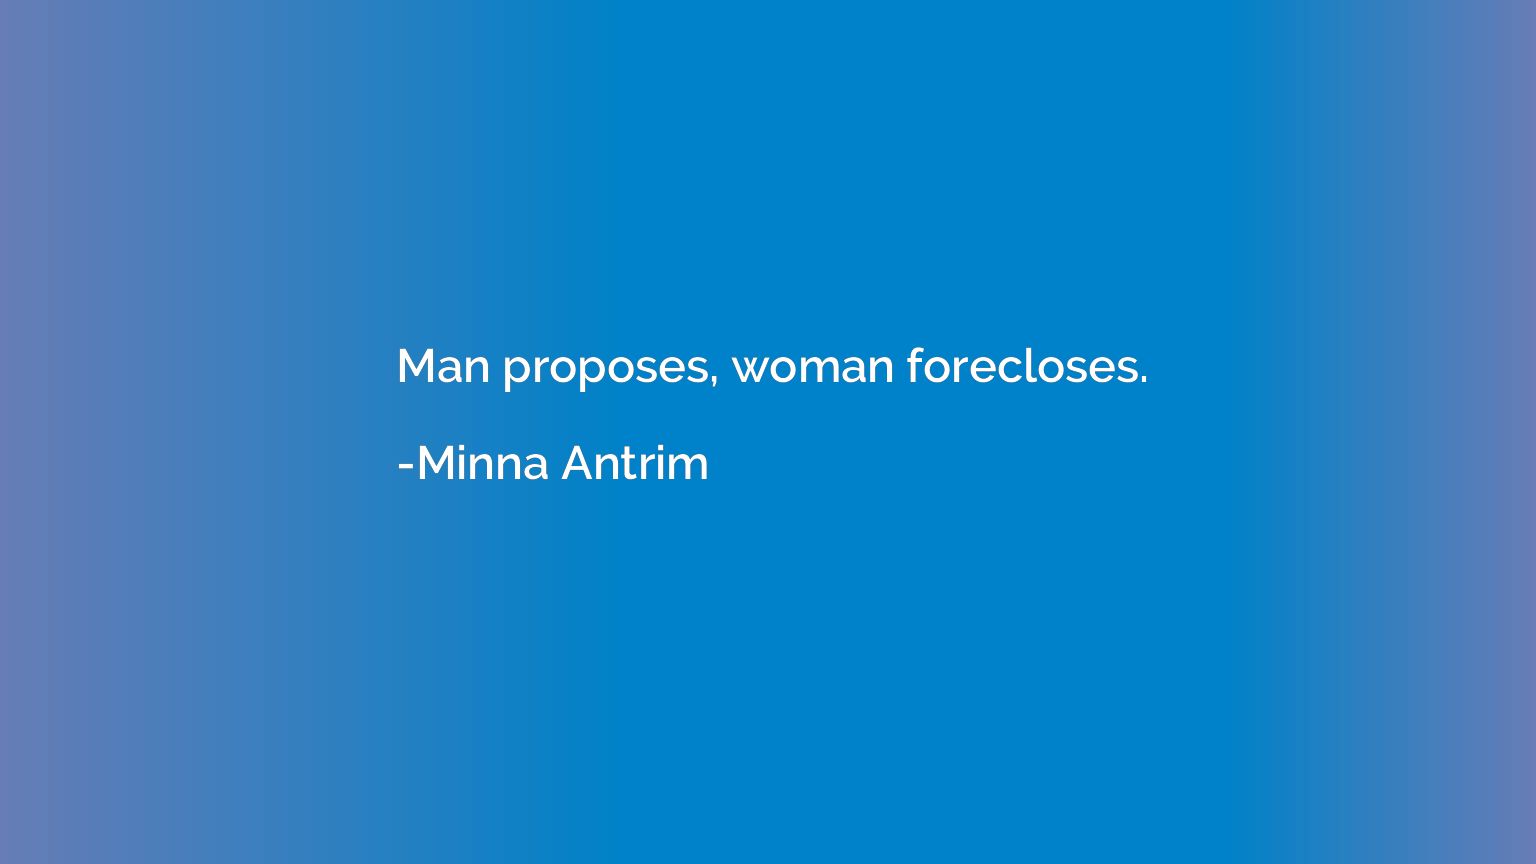 Man proposes, woman forecloses.